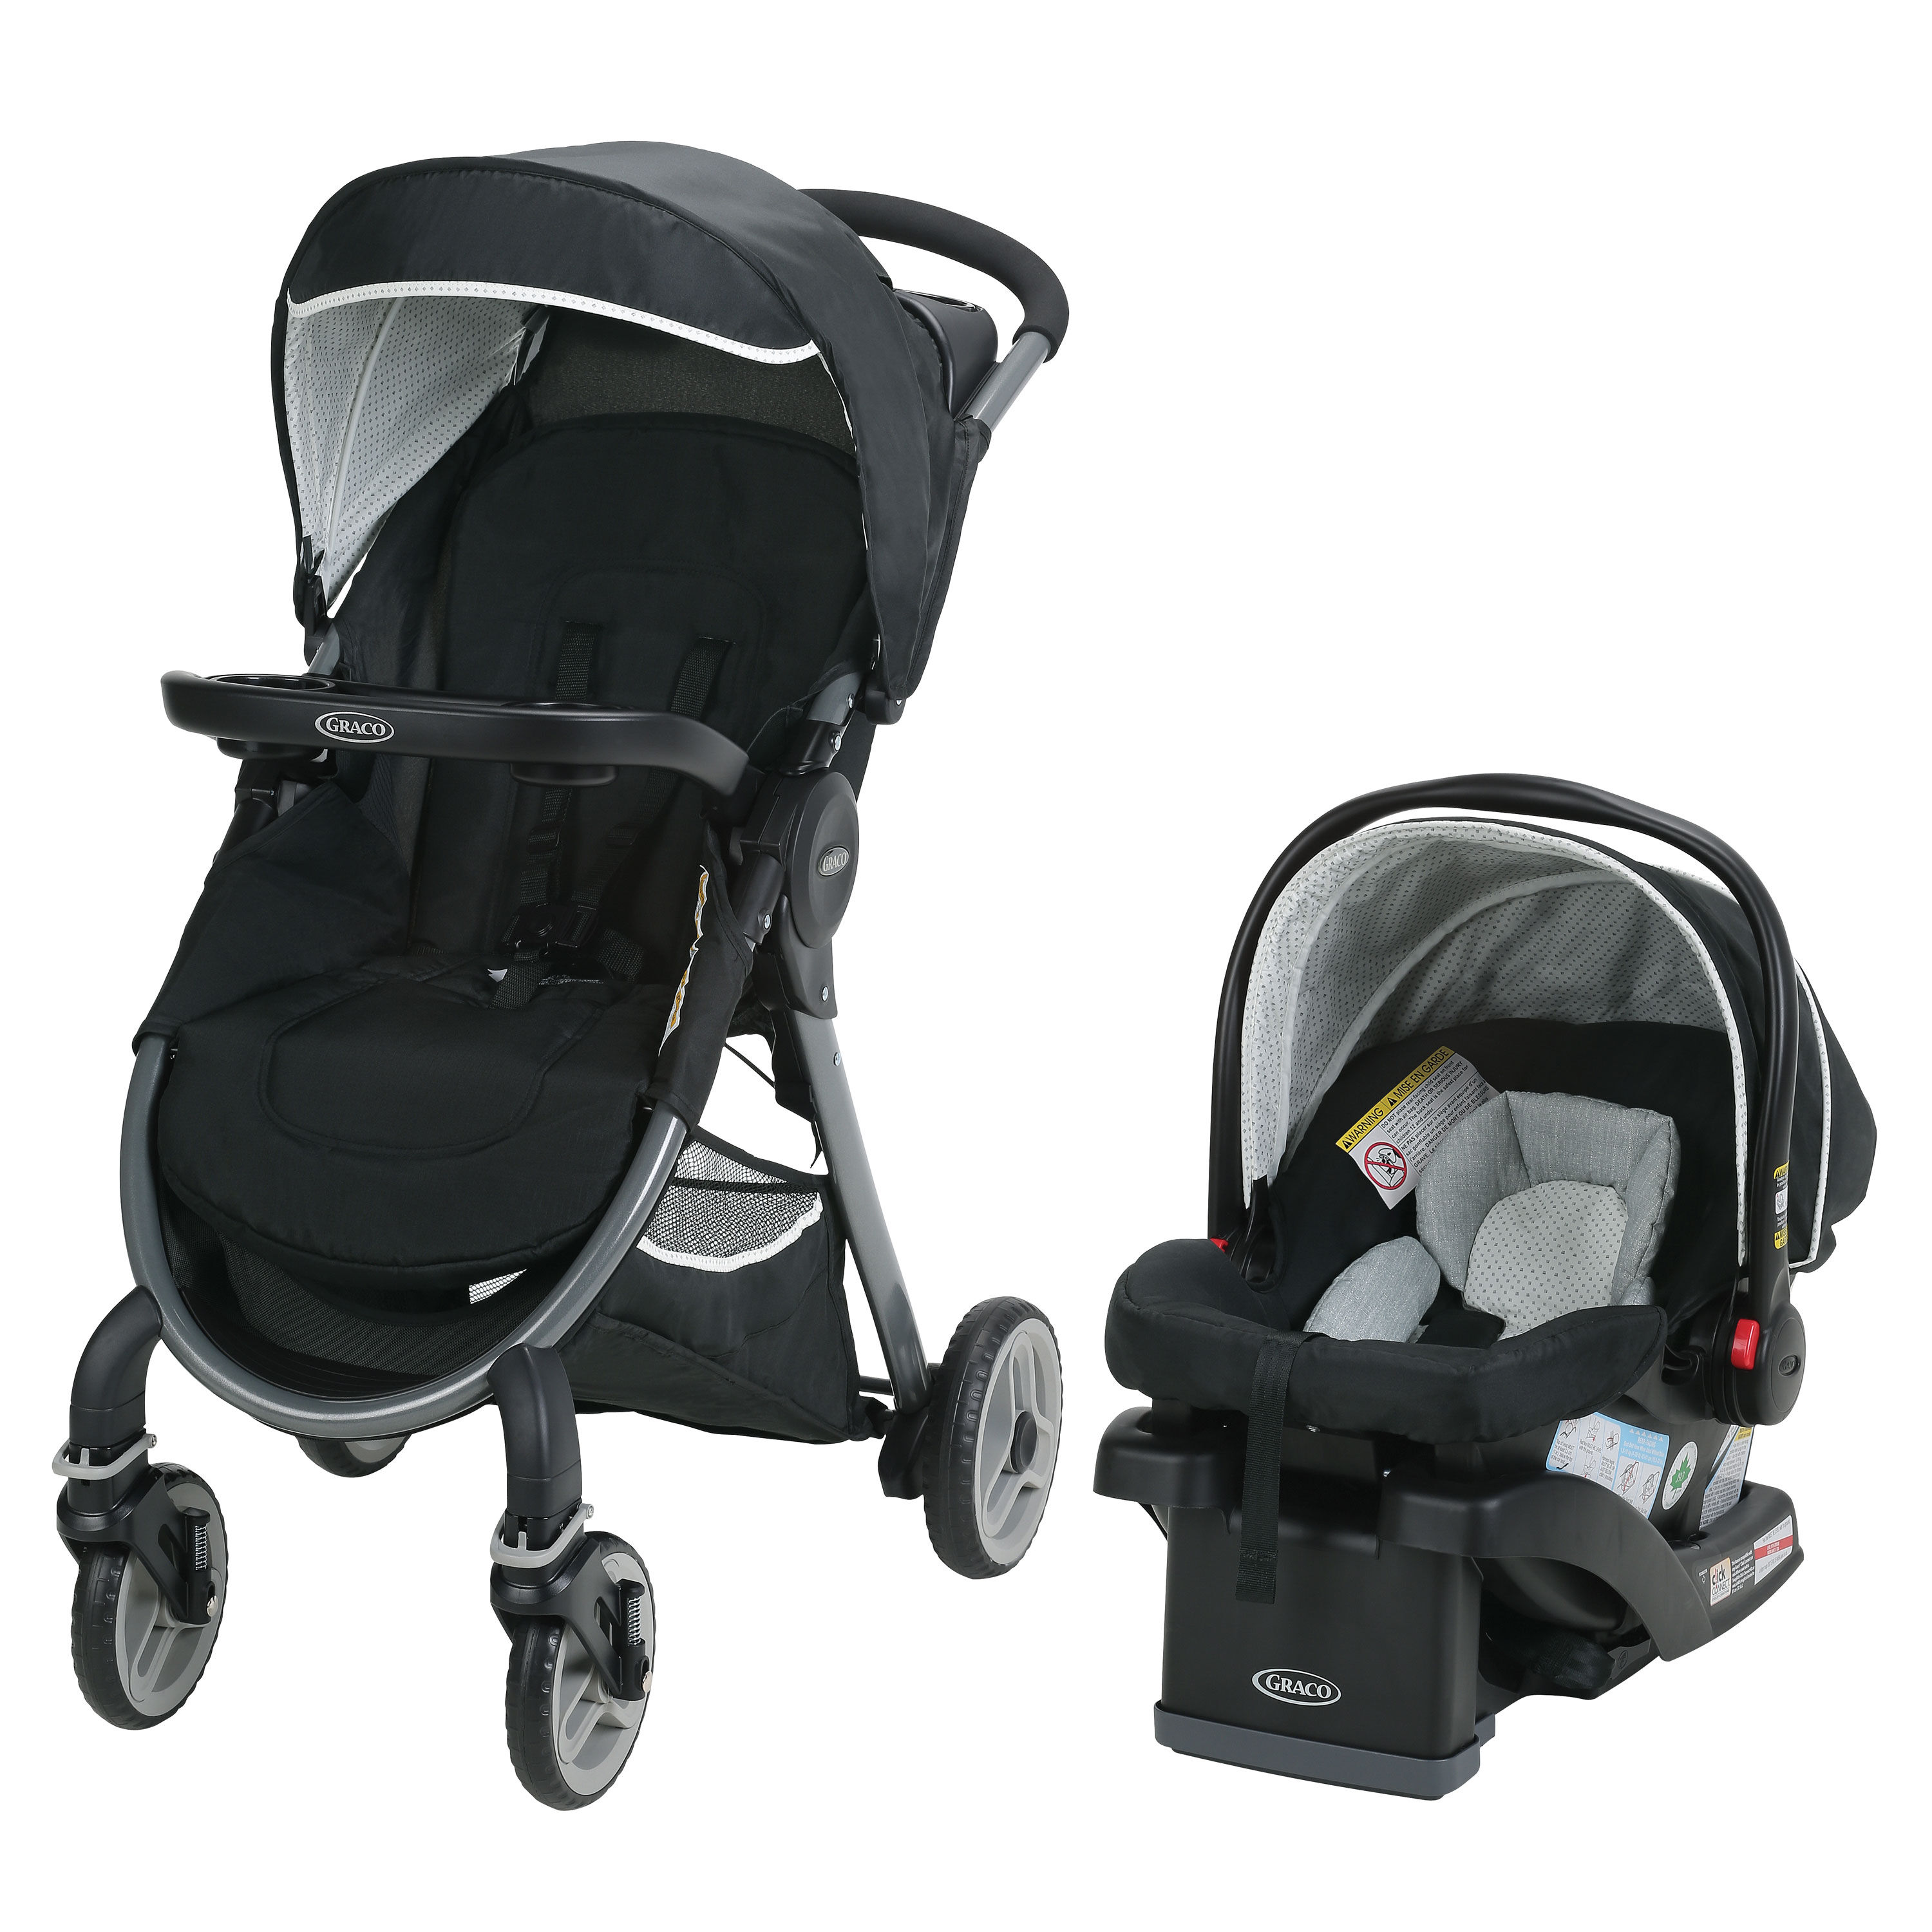 graco fit fold travel system